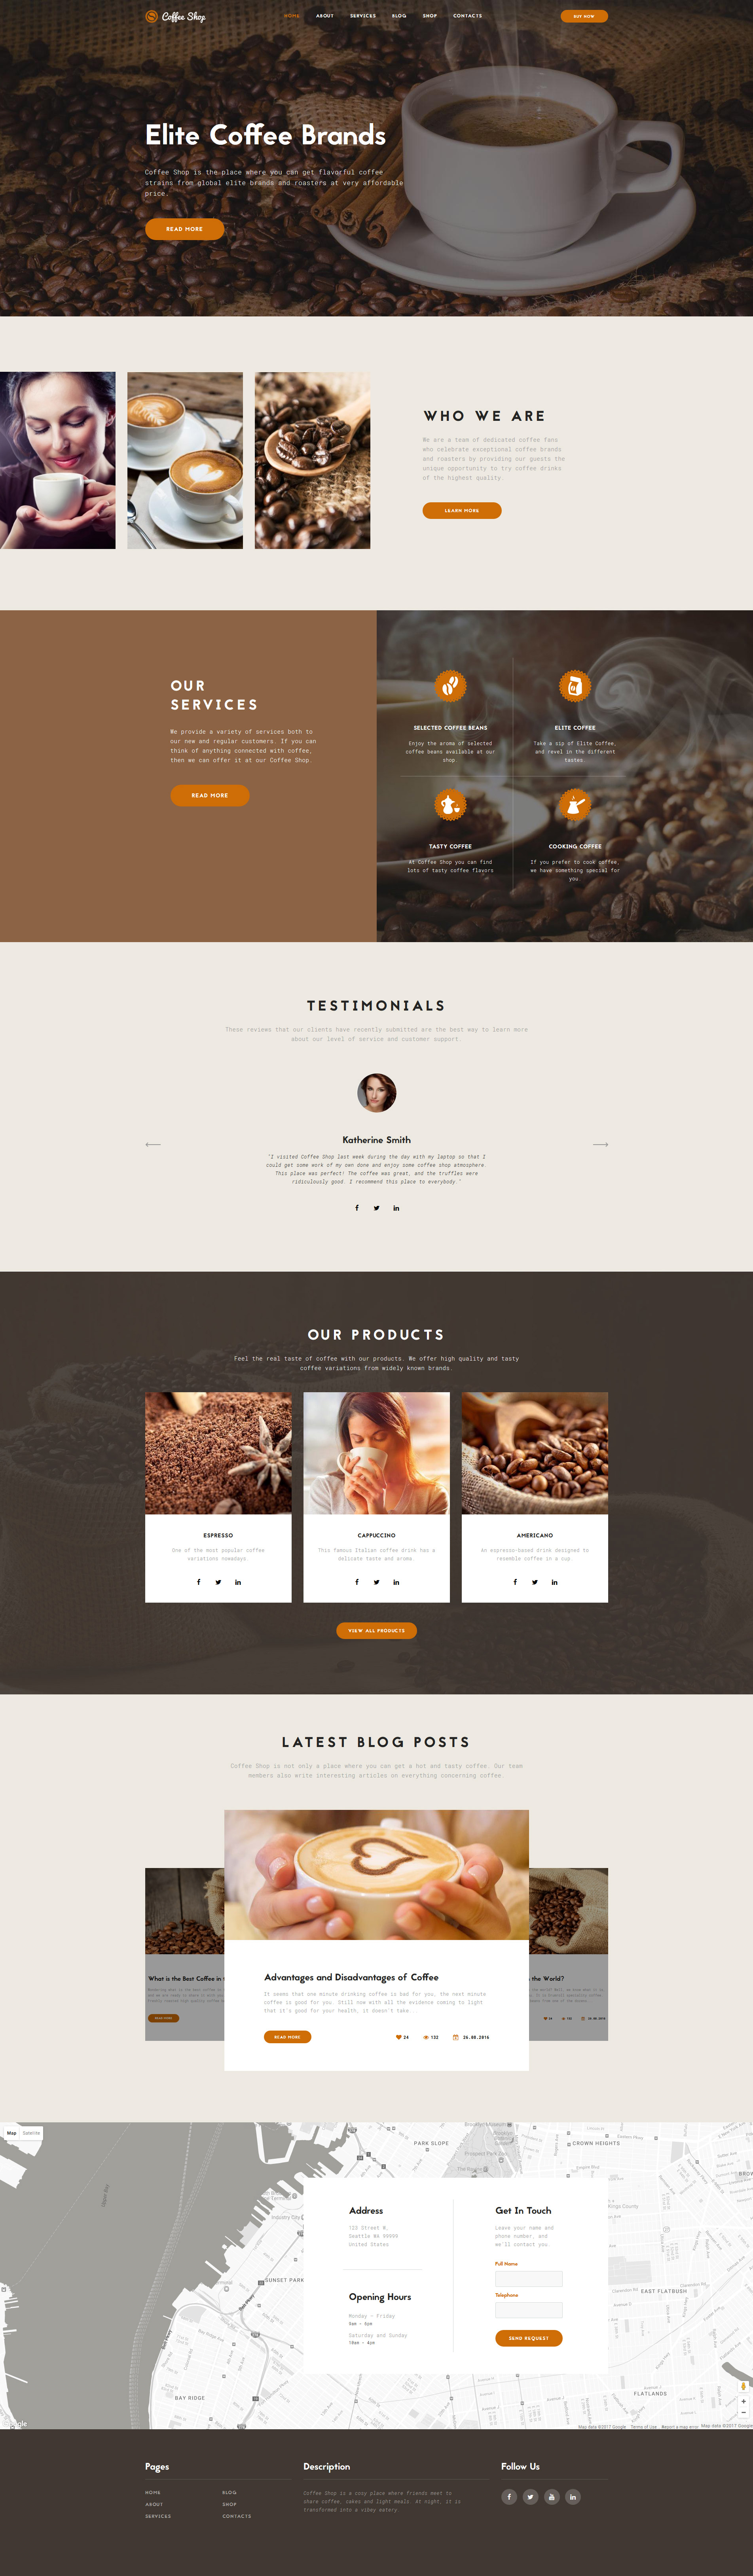 Coffee Shop Website Template from scr.template-help.com